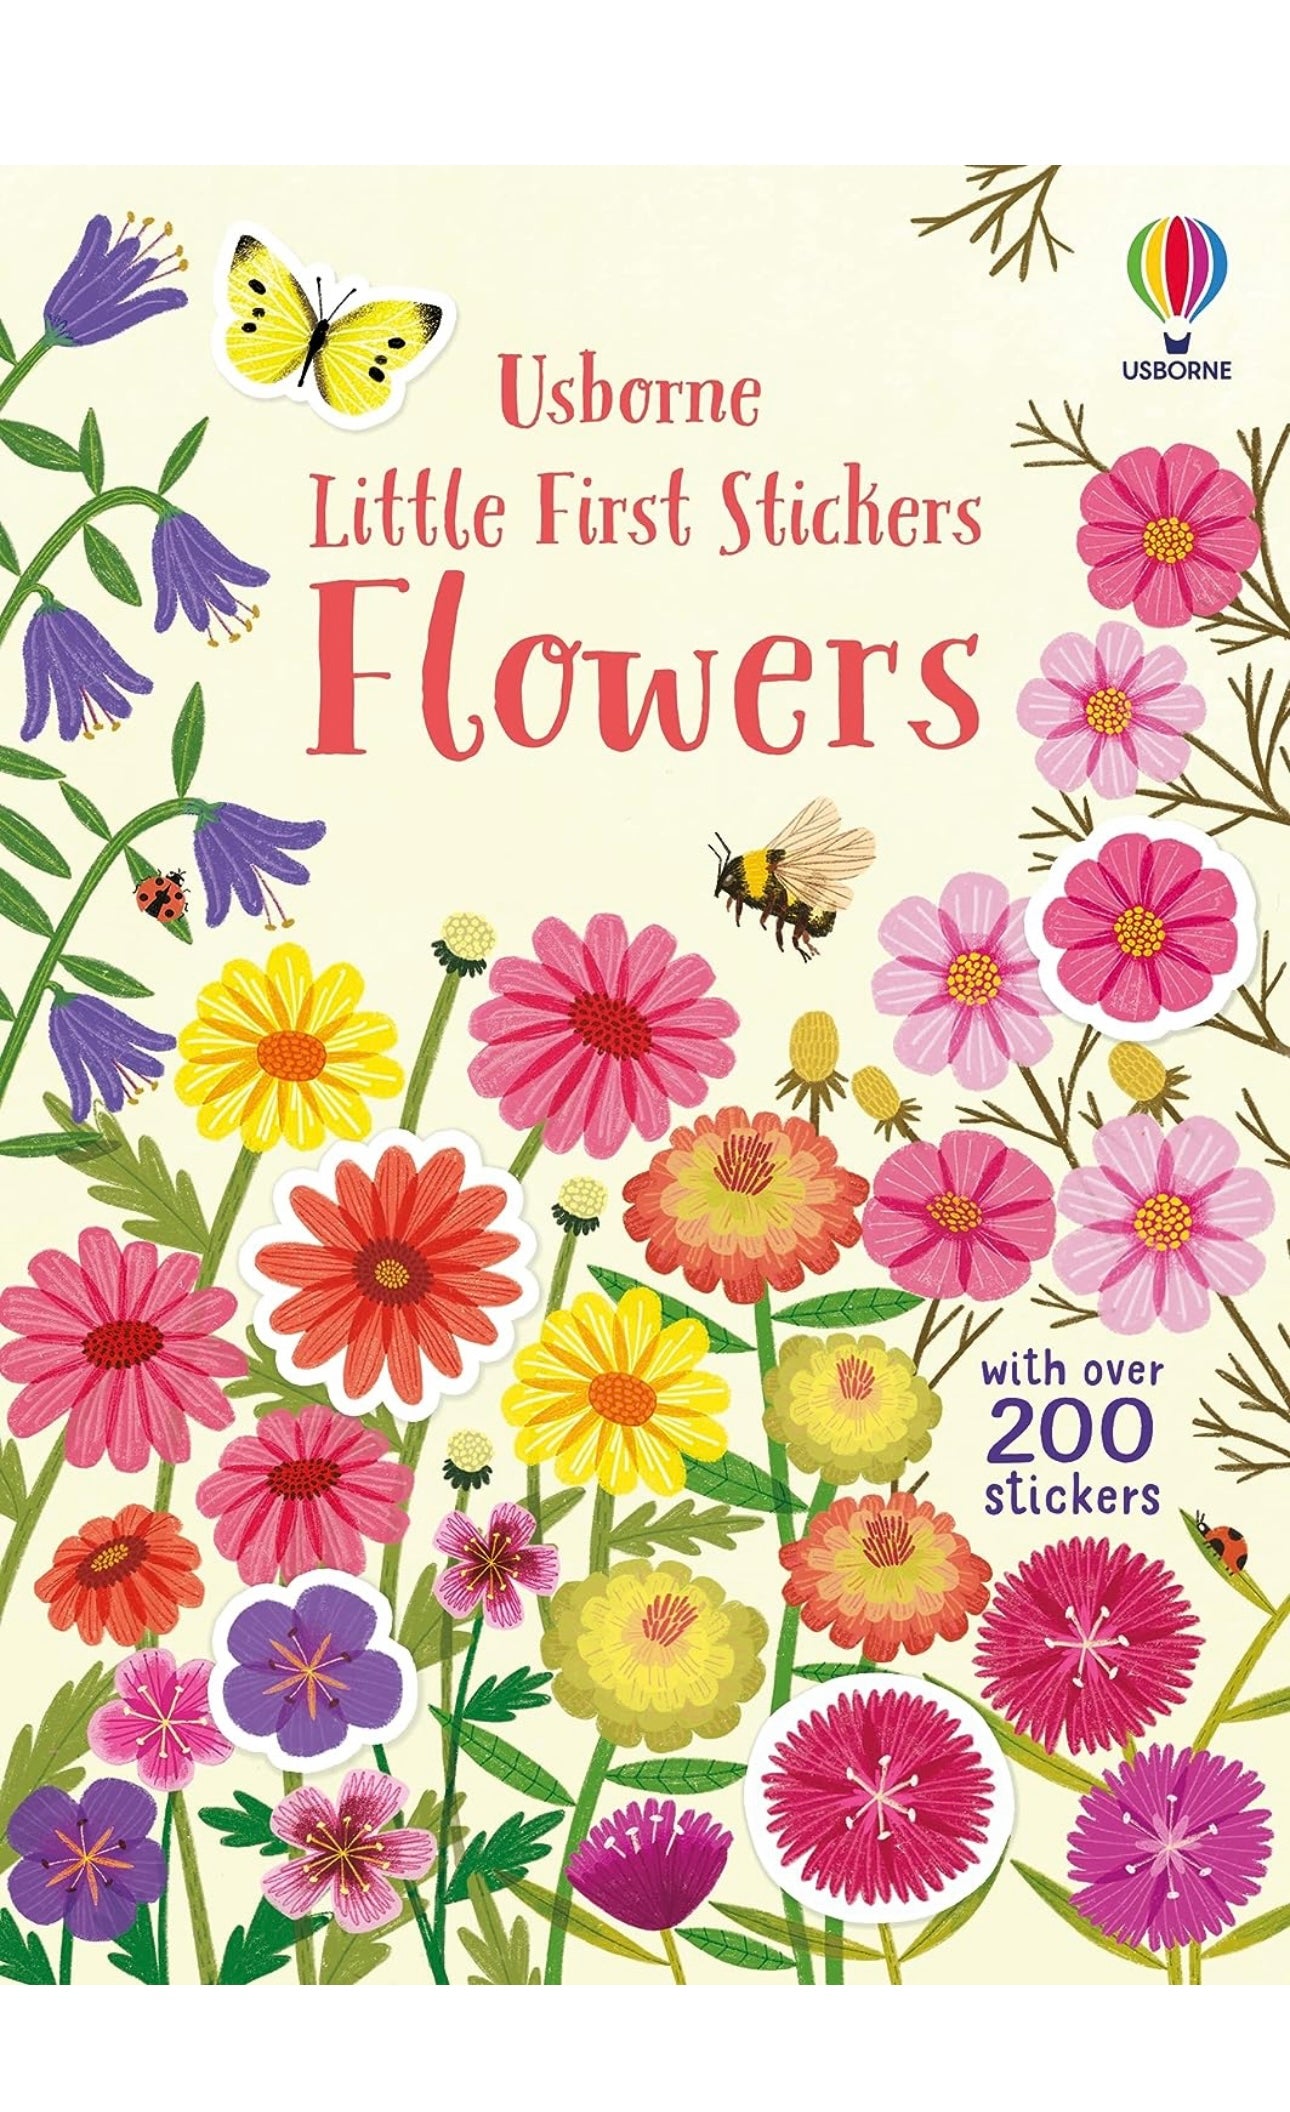 Book - Little First Stickers, Flowers